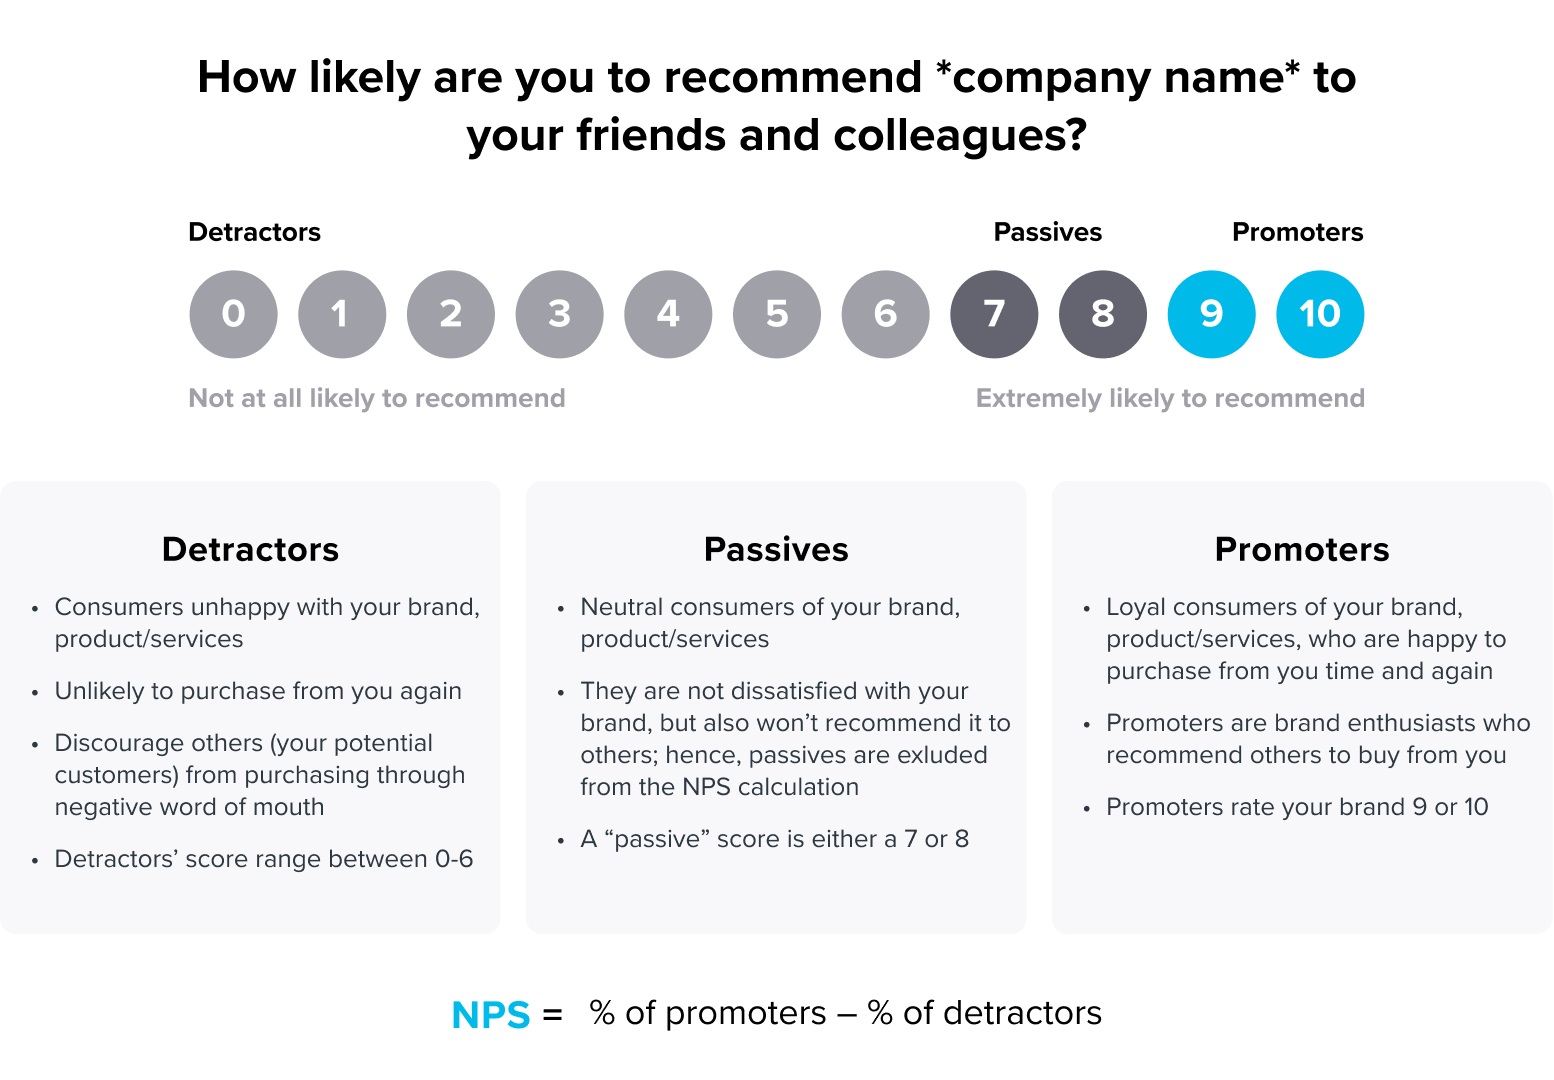 A infographic showing how net promoter score (NPS) is measured. It also has definitions for detractors, passives and promoters. At the bottom, the formula for calculating NPS is mentioned, which is the difference in the percentages of promoters and detractors.